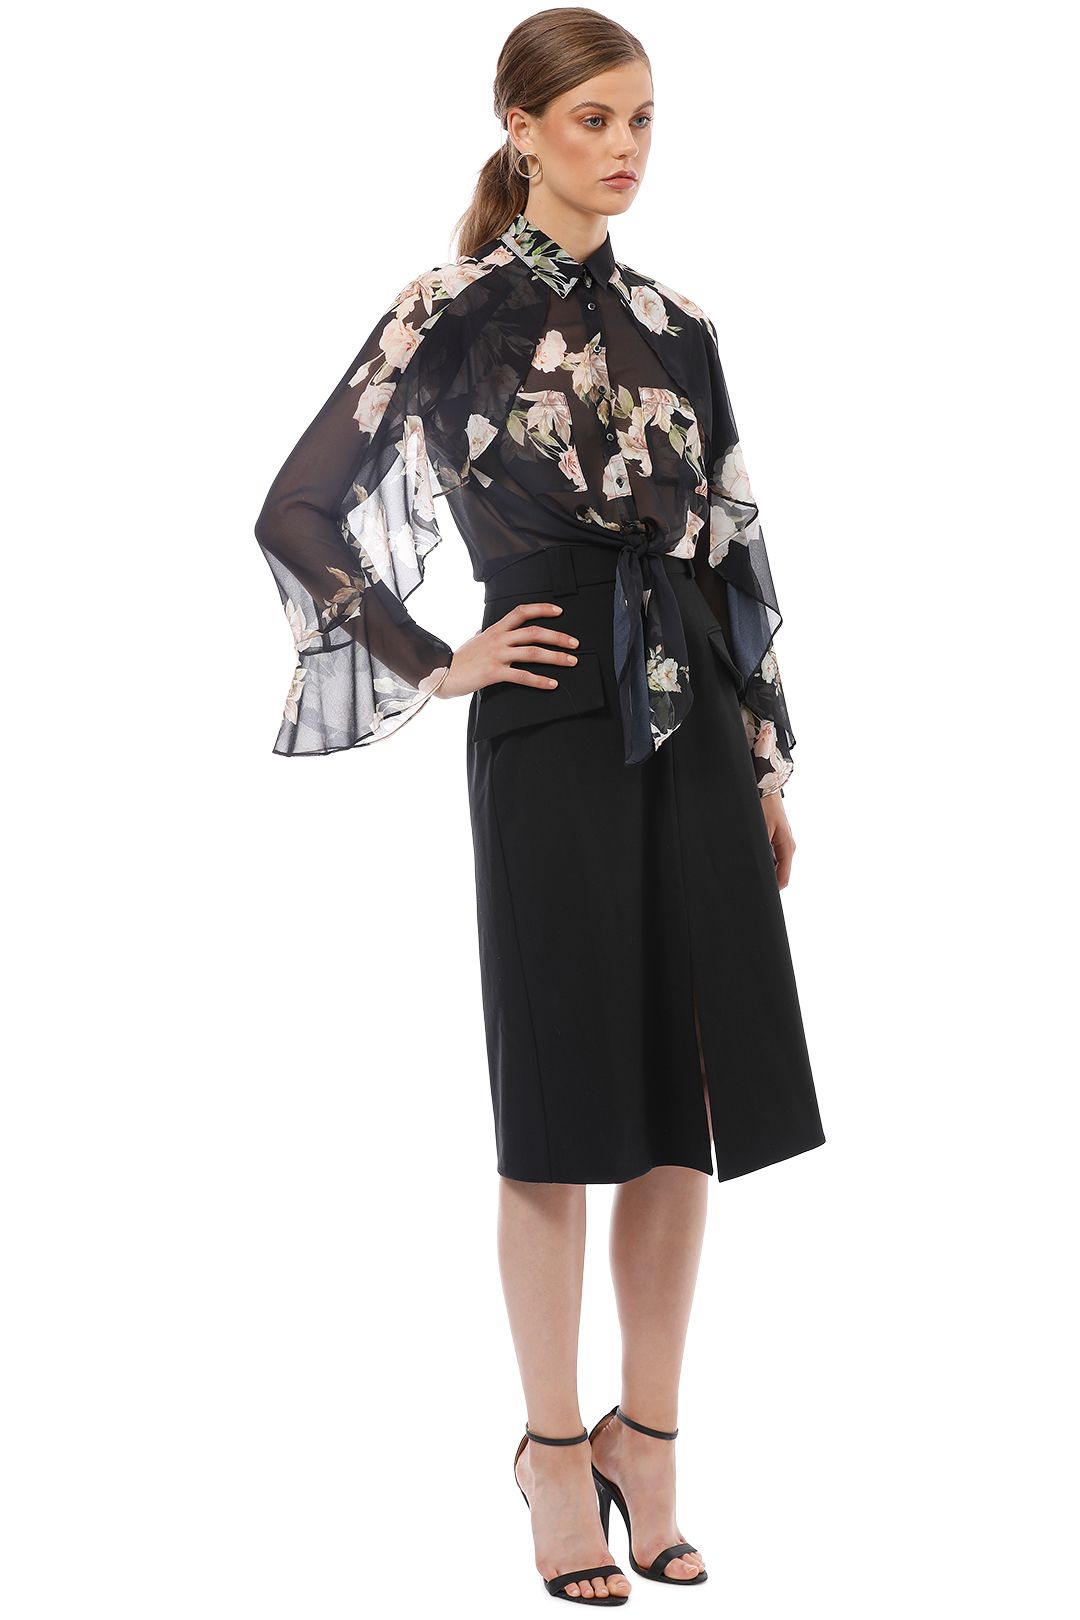 Sheike - Bethany Blouse - Floral - Side